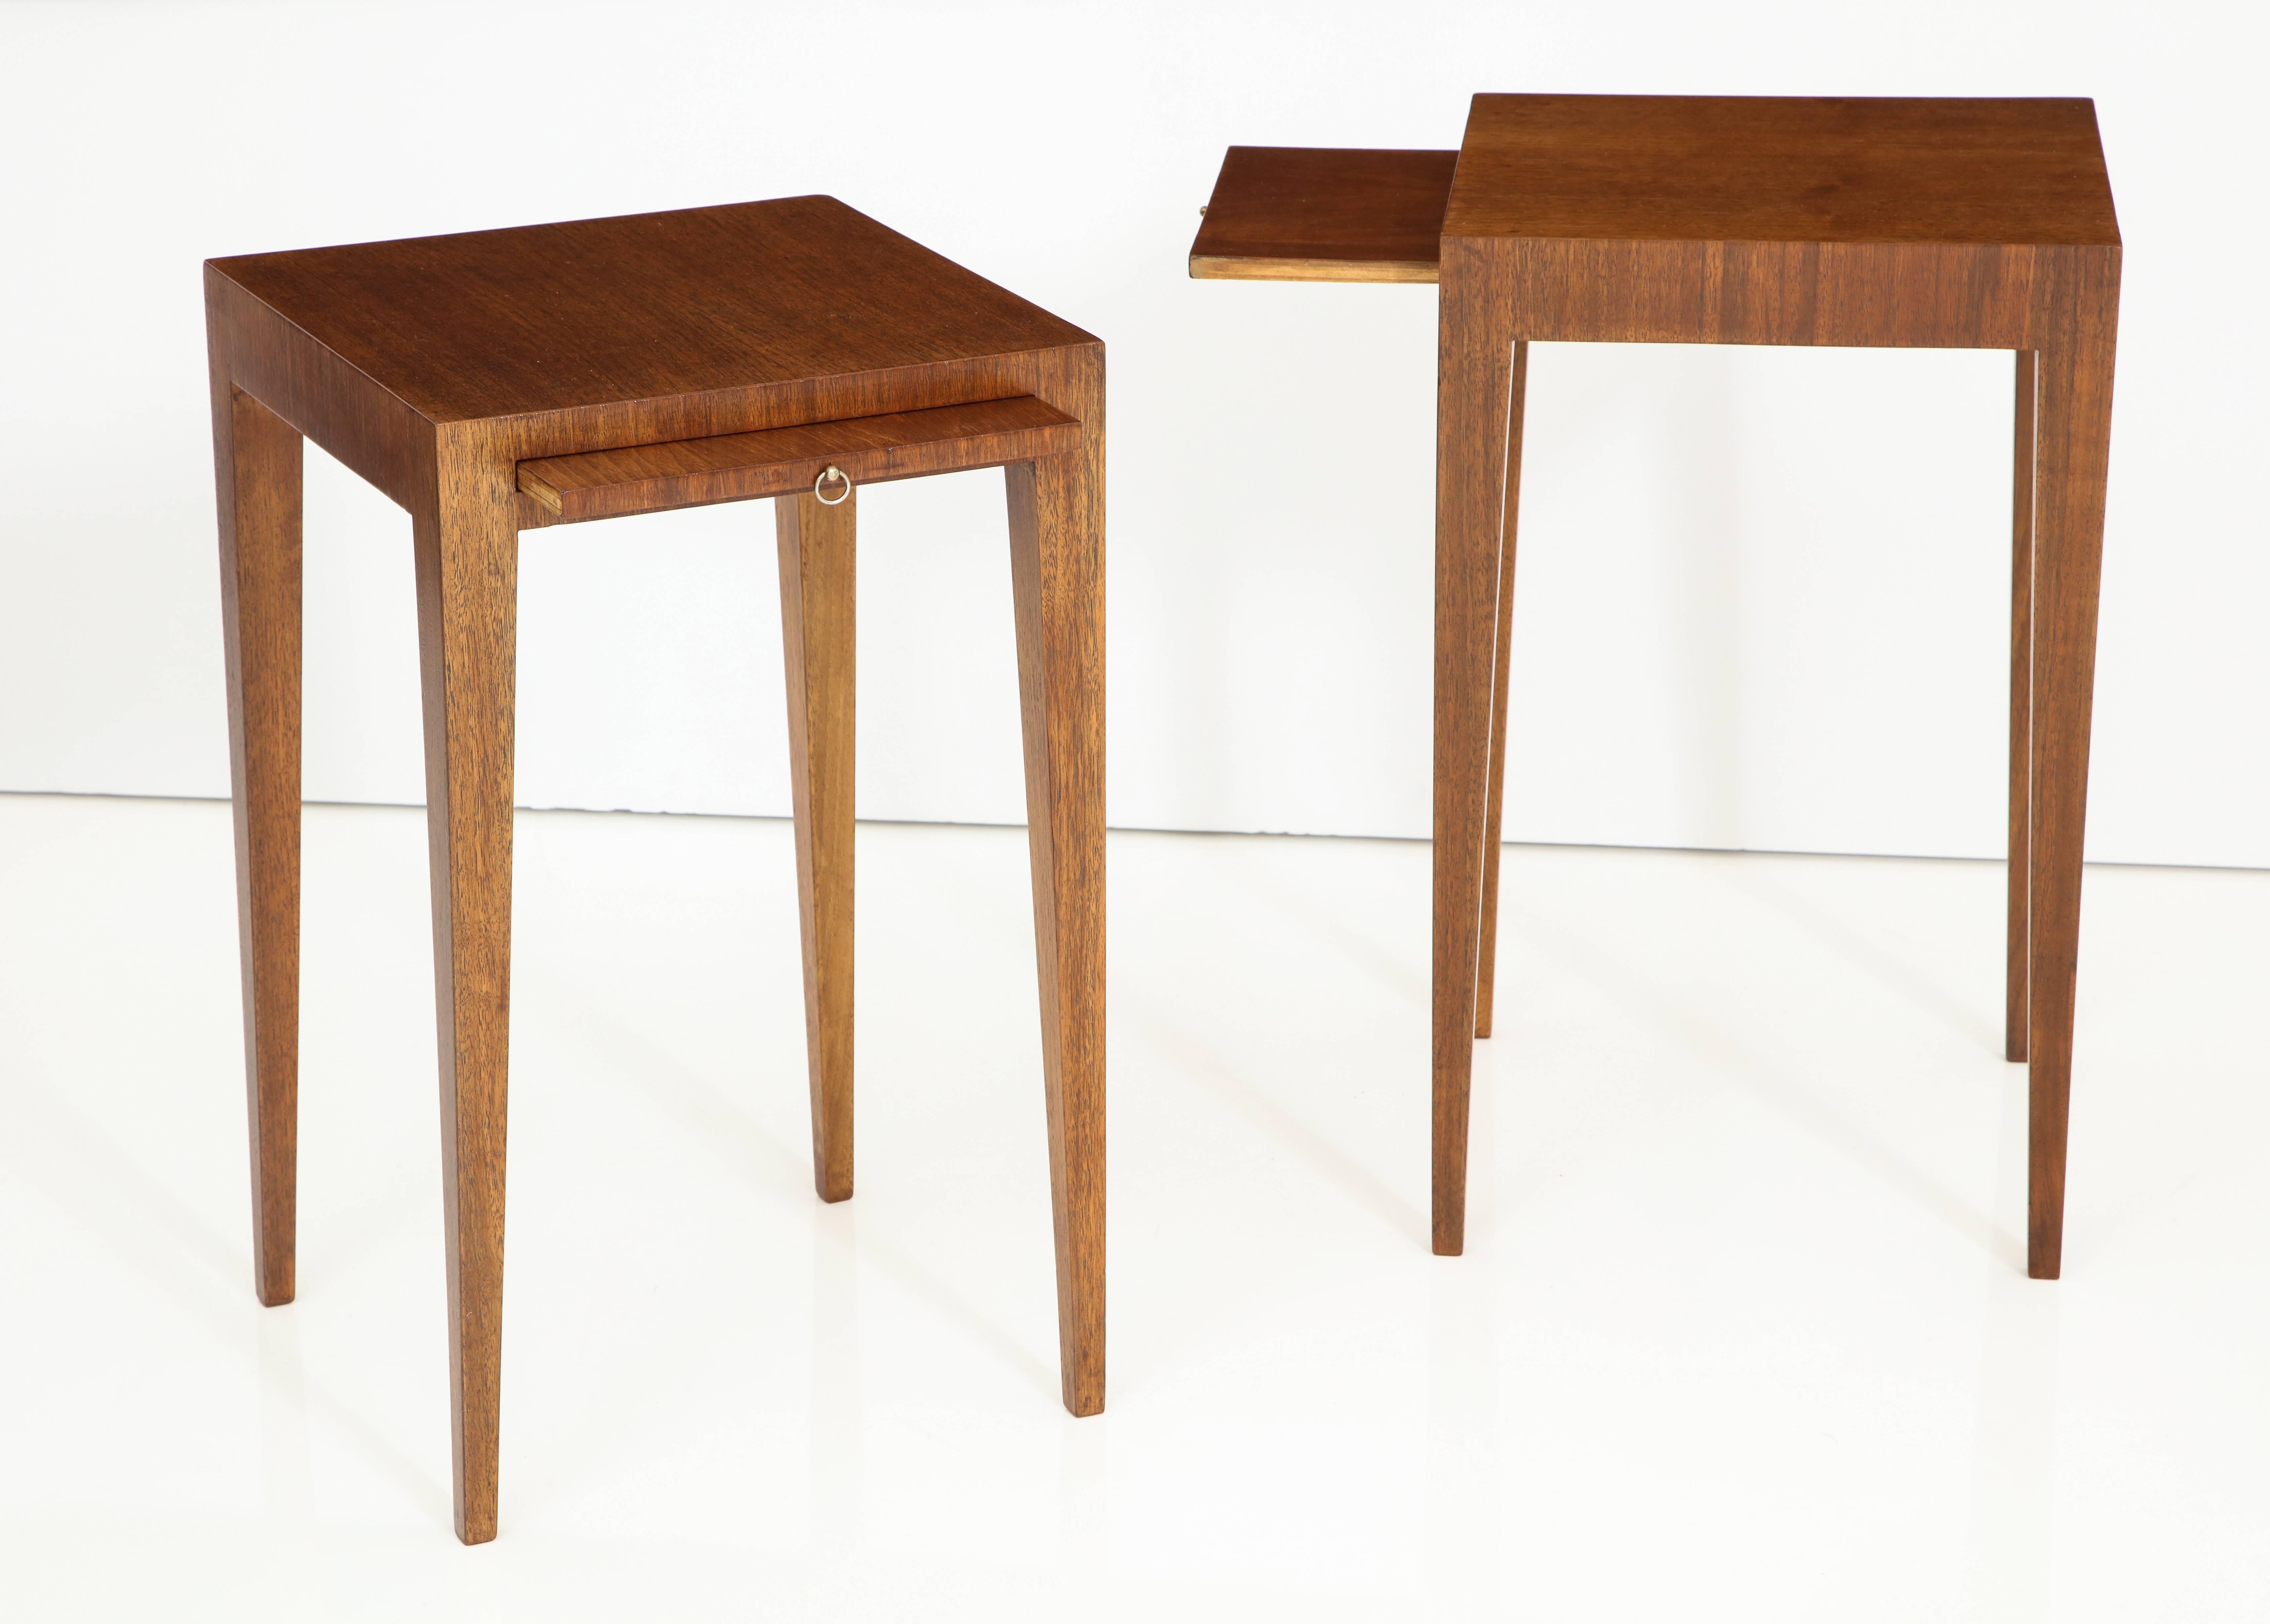 A pair of French Art Deco walnut side tables with elegant tapered legs, the front with a pull slide.
France, circa 1940
Size: 21